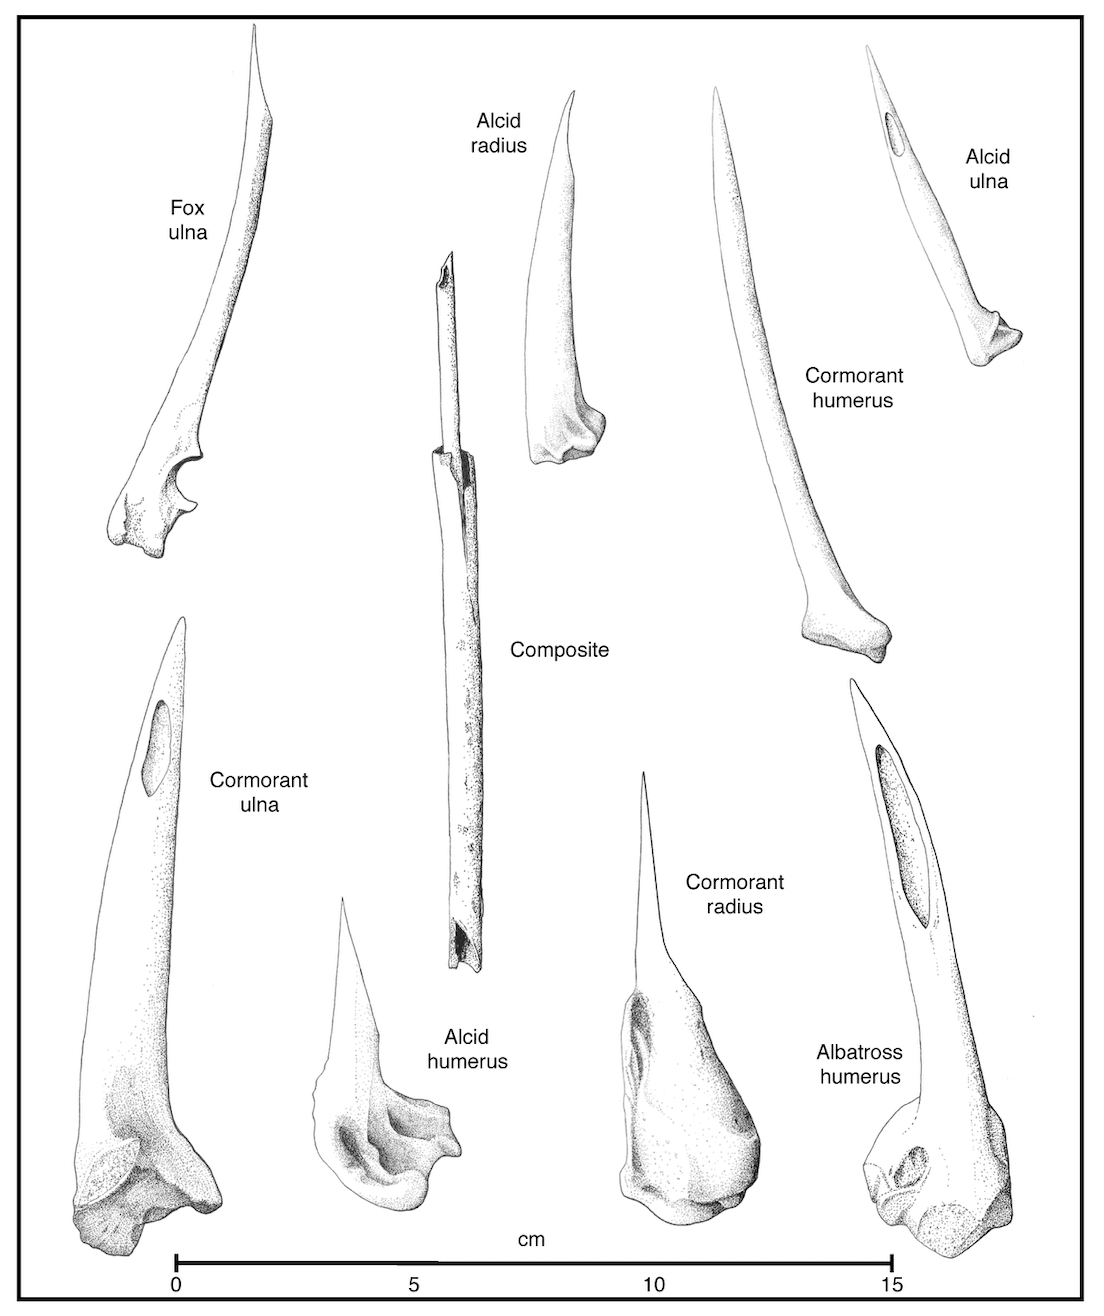 Aleuts used the ulna, radius and humerus bones of alcids and cormorants to create awls used primarily for sewing.